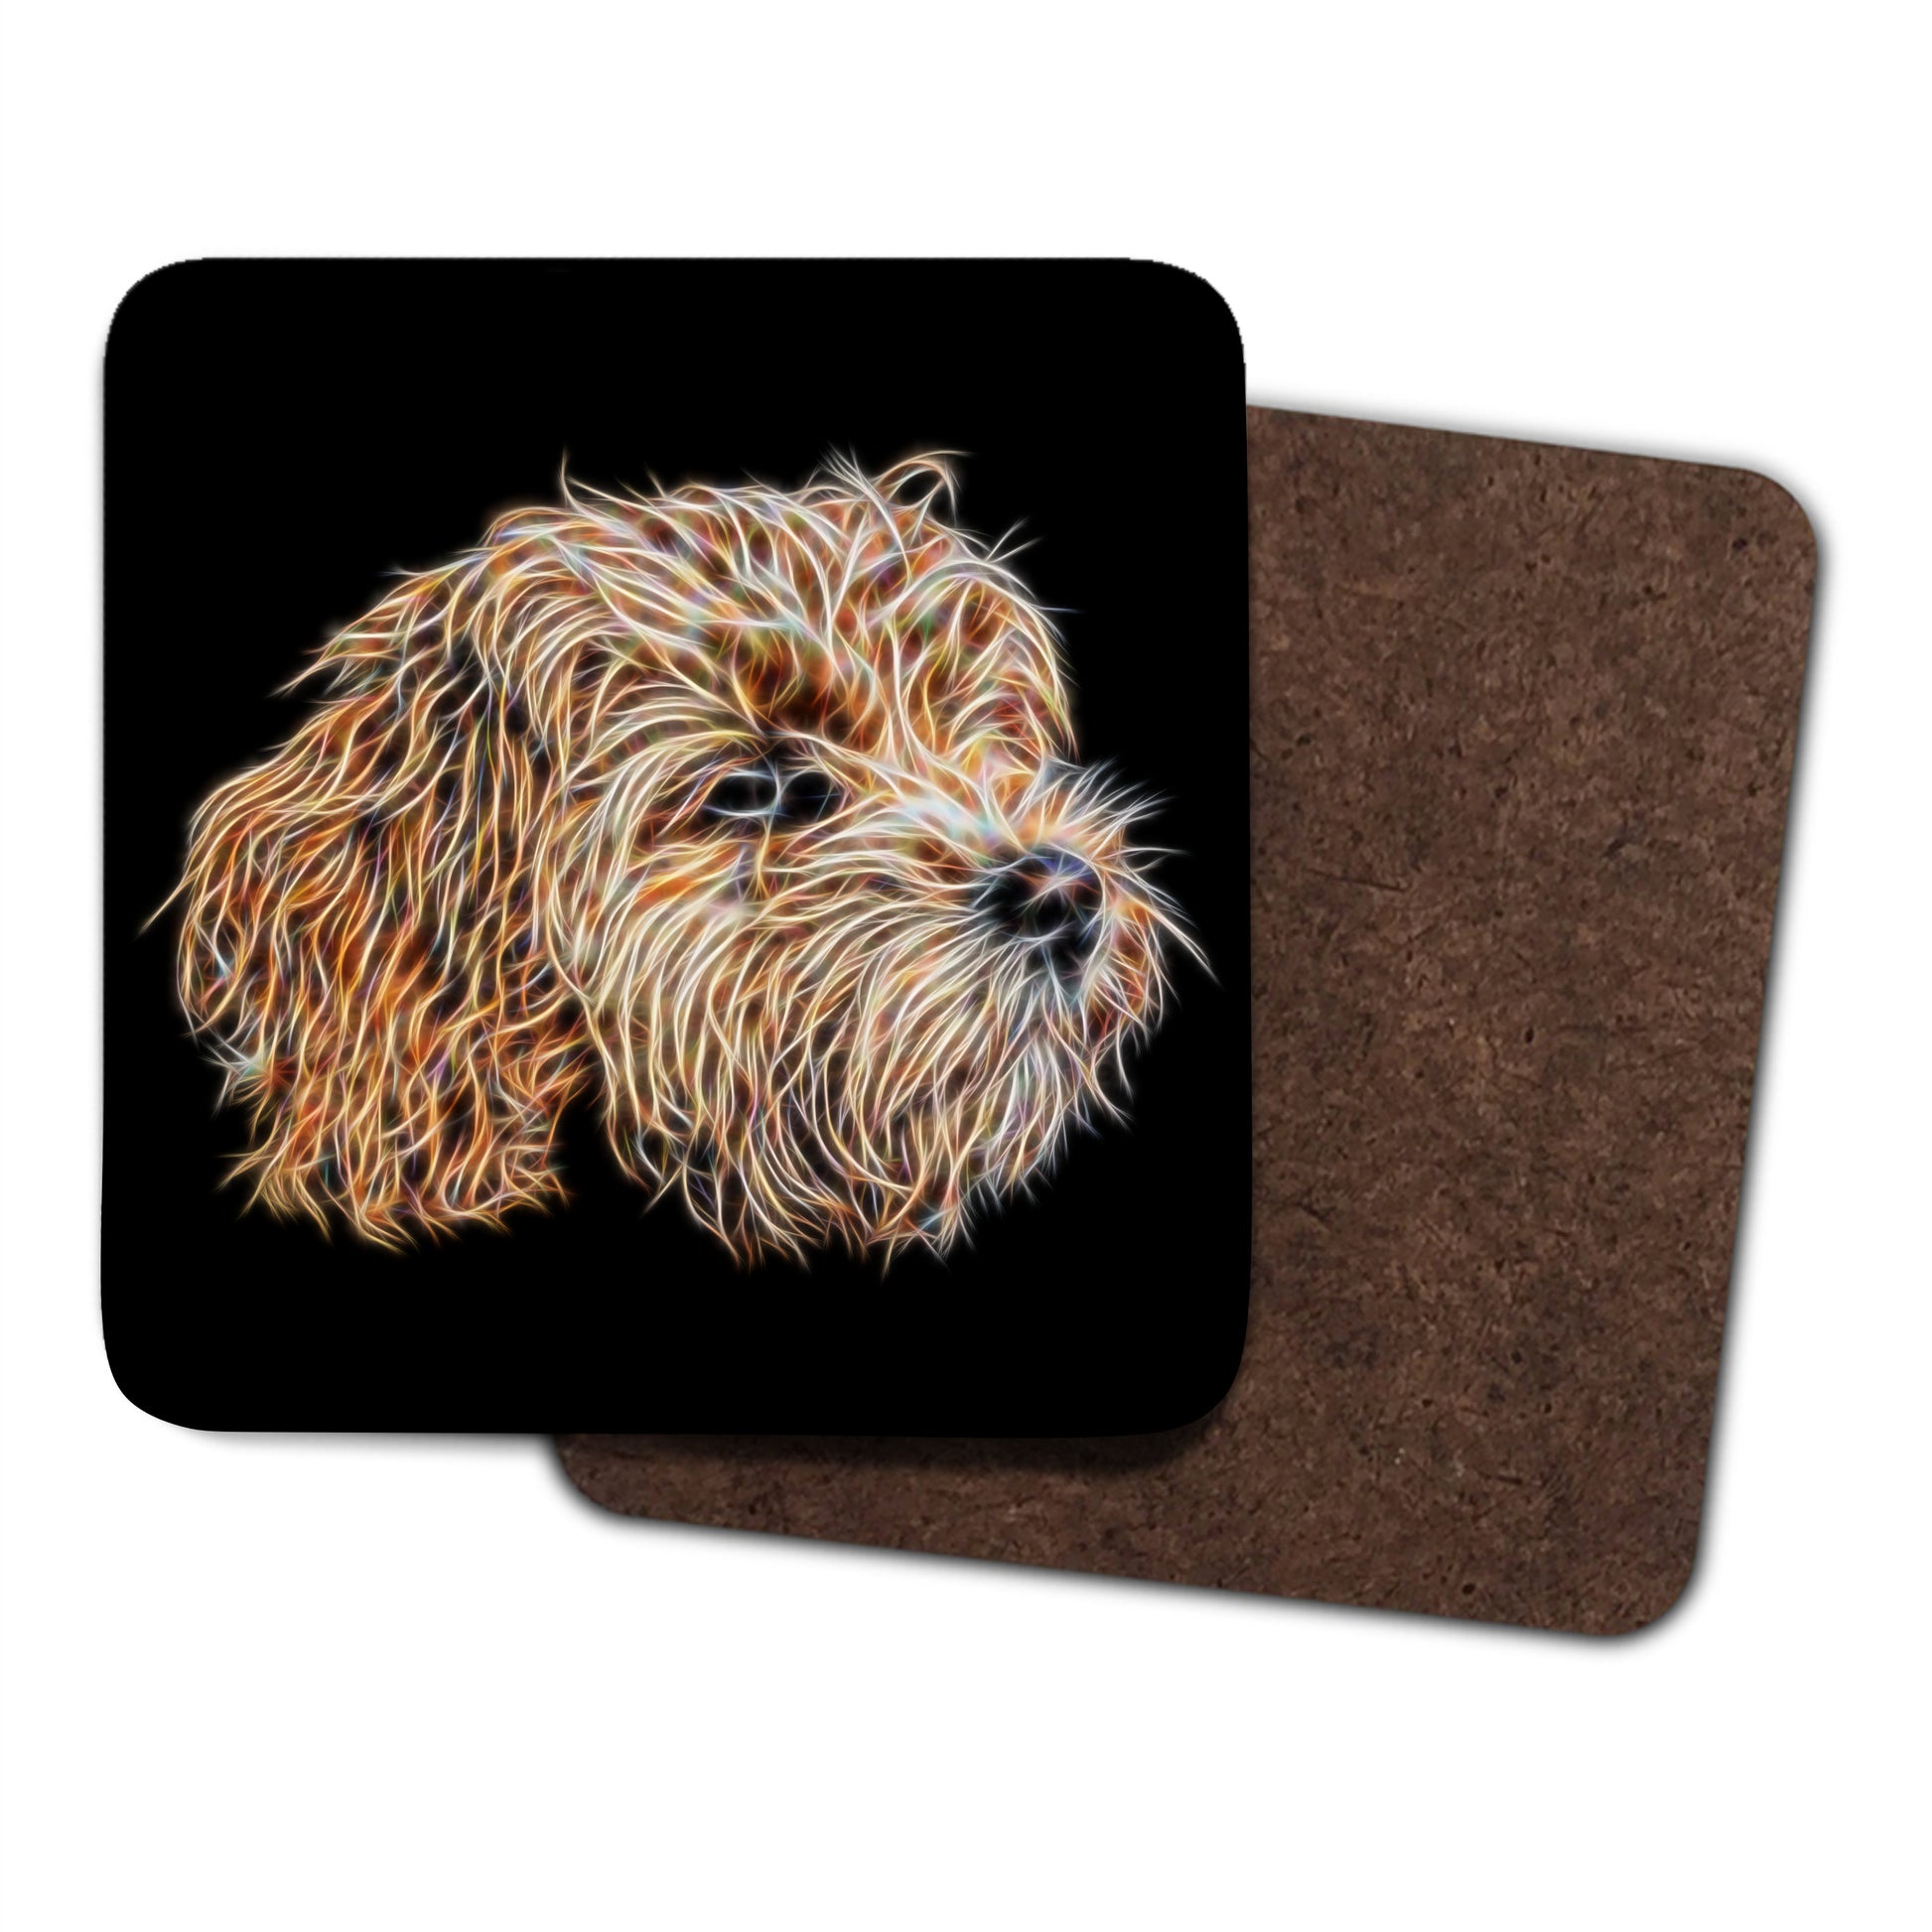 Apricot Cavapoo Coasters, Set of 2, with Stunning Fractal Art Design.